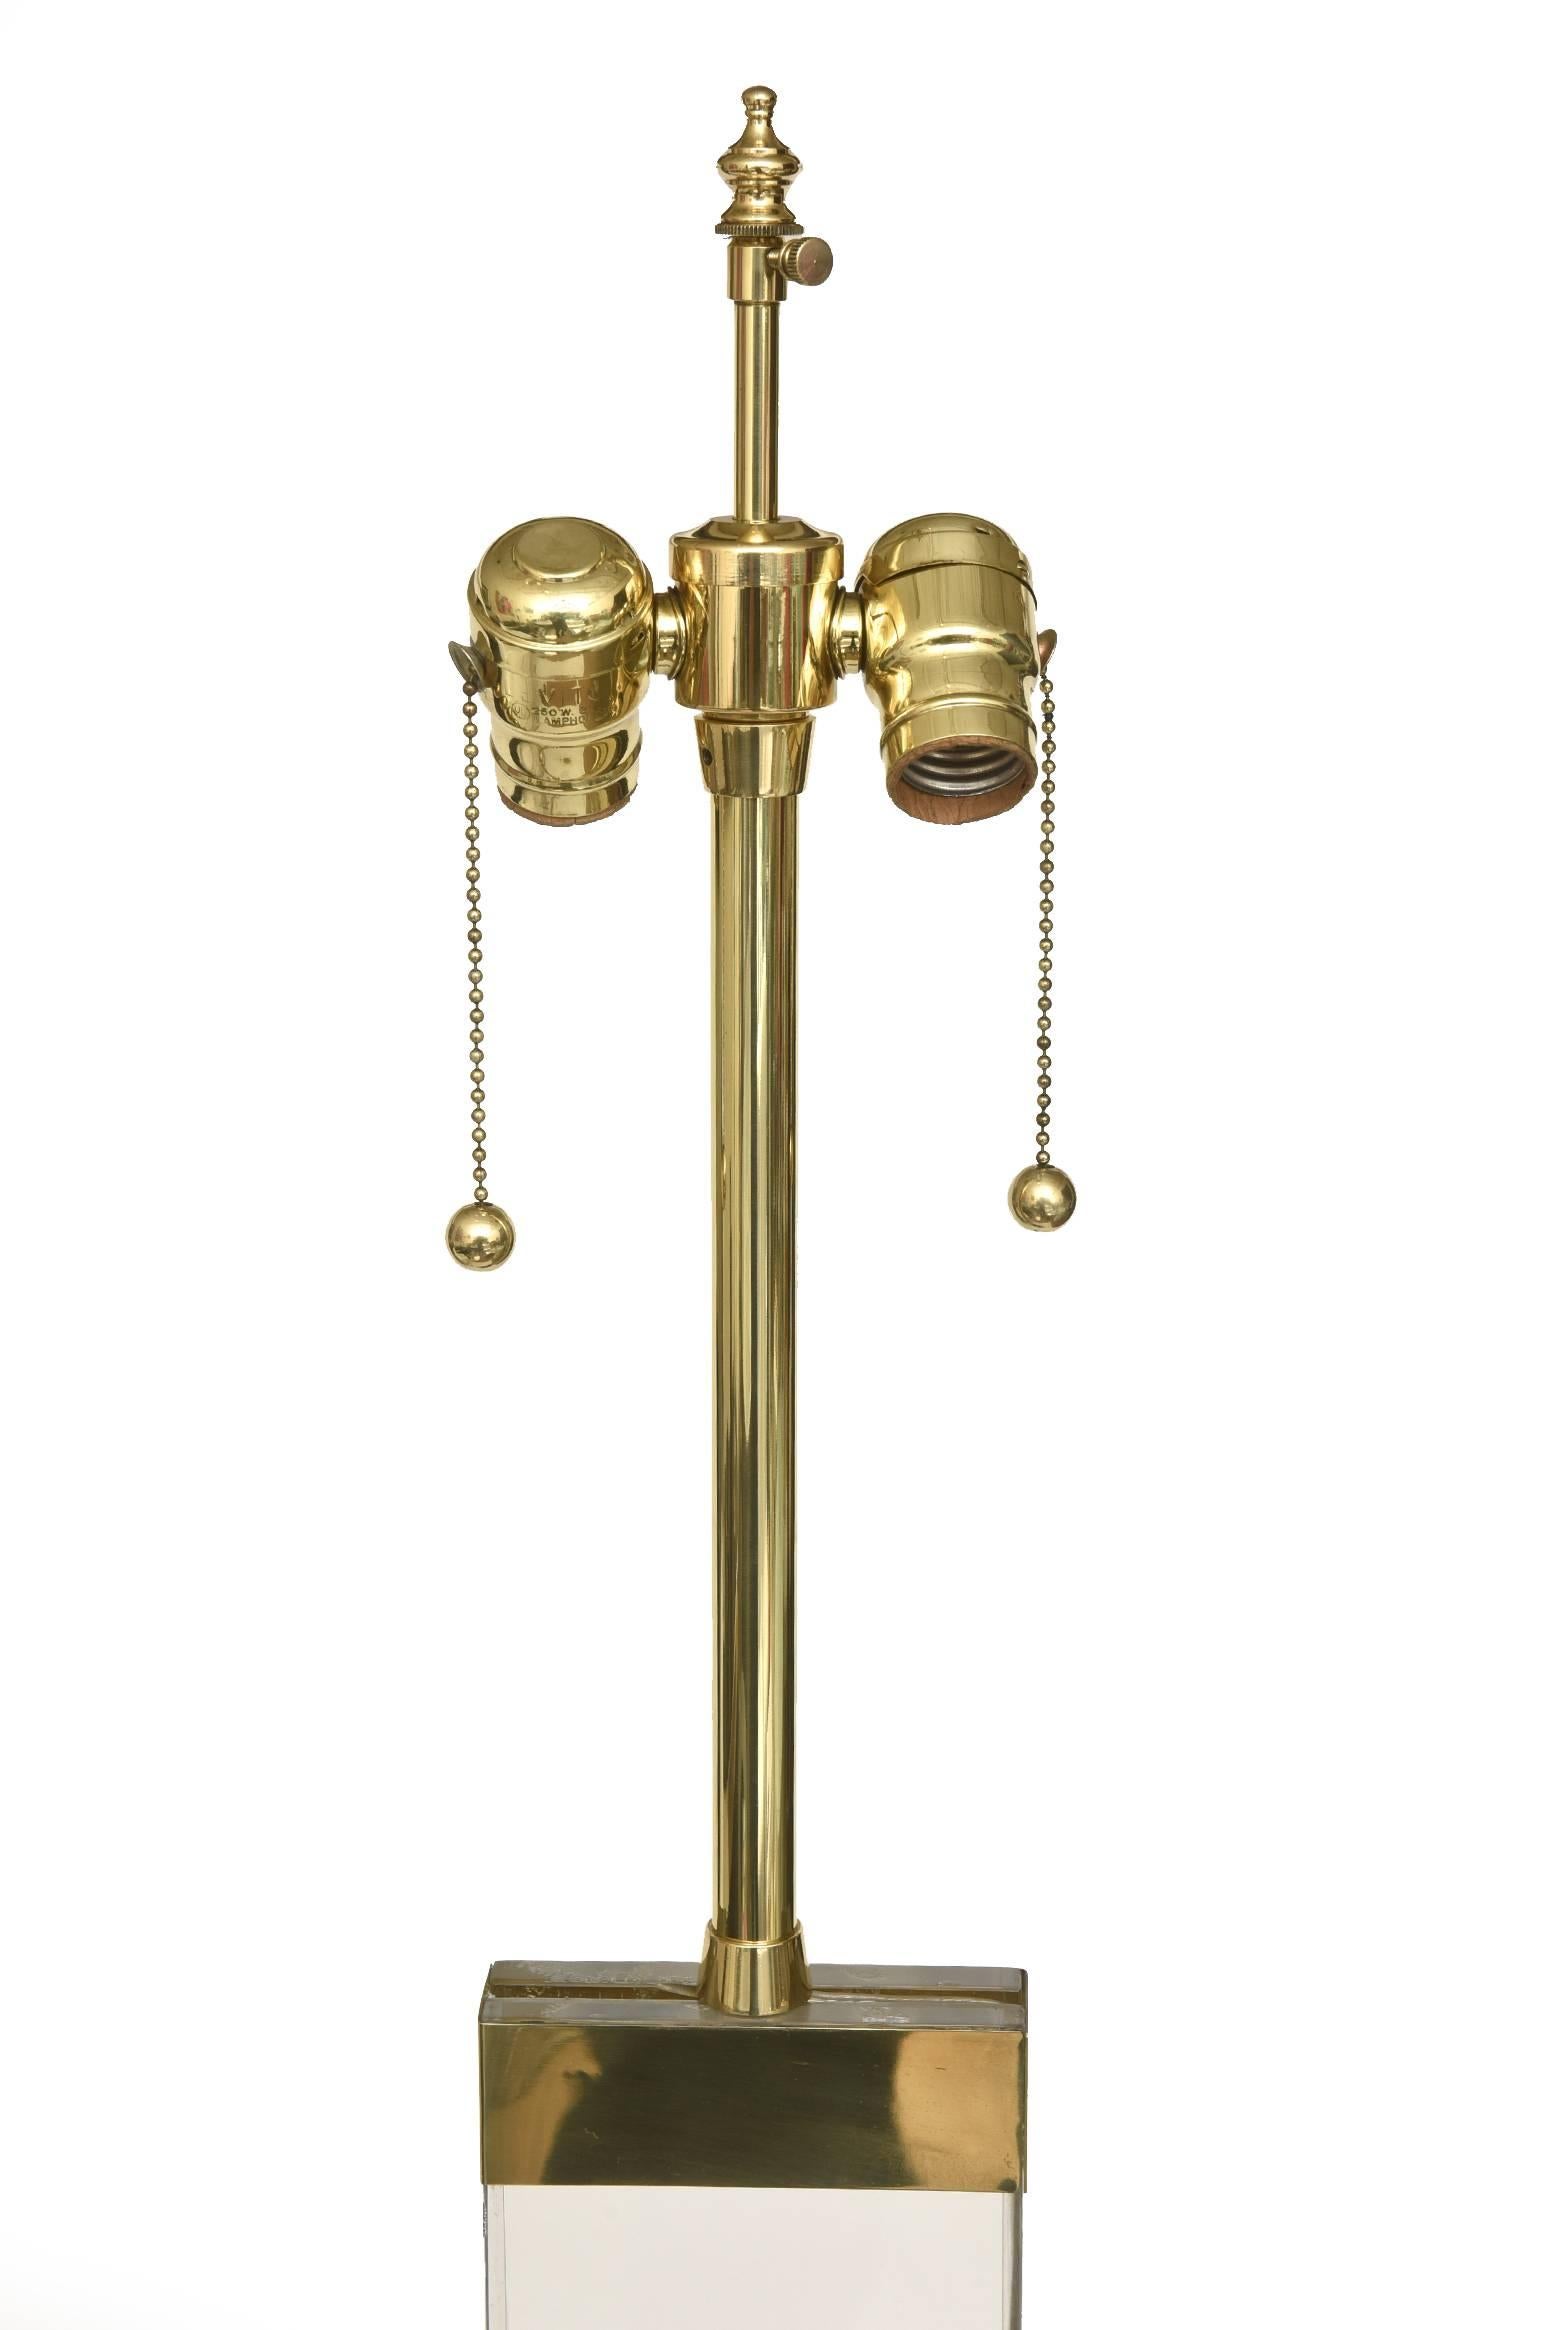 This fabulous restored vintage column floor lamp has two appendages of ram's heads on the sides. The components are brass and lucite. It has been restored to the best it can be and rewired. It was also polished. It does not have a shade included.